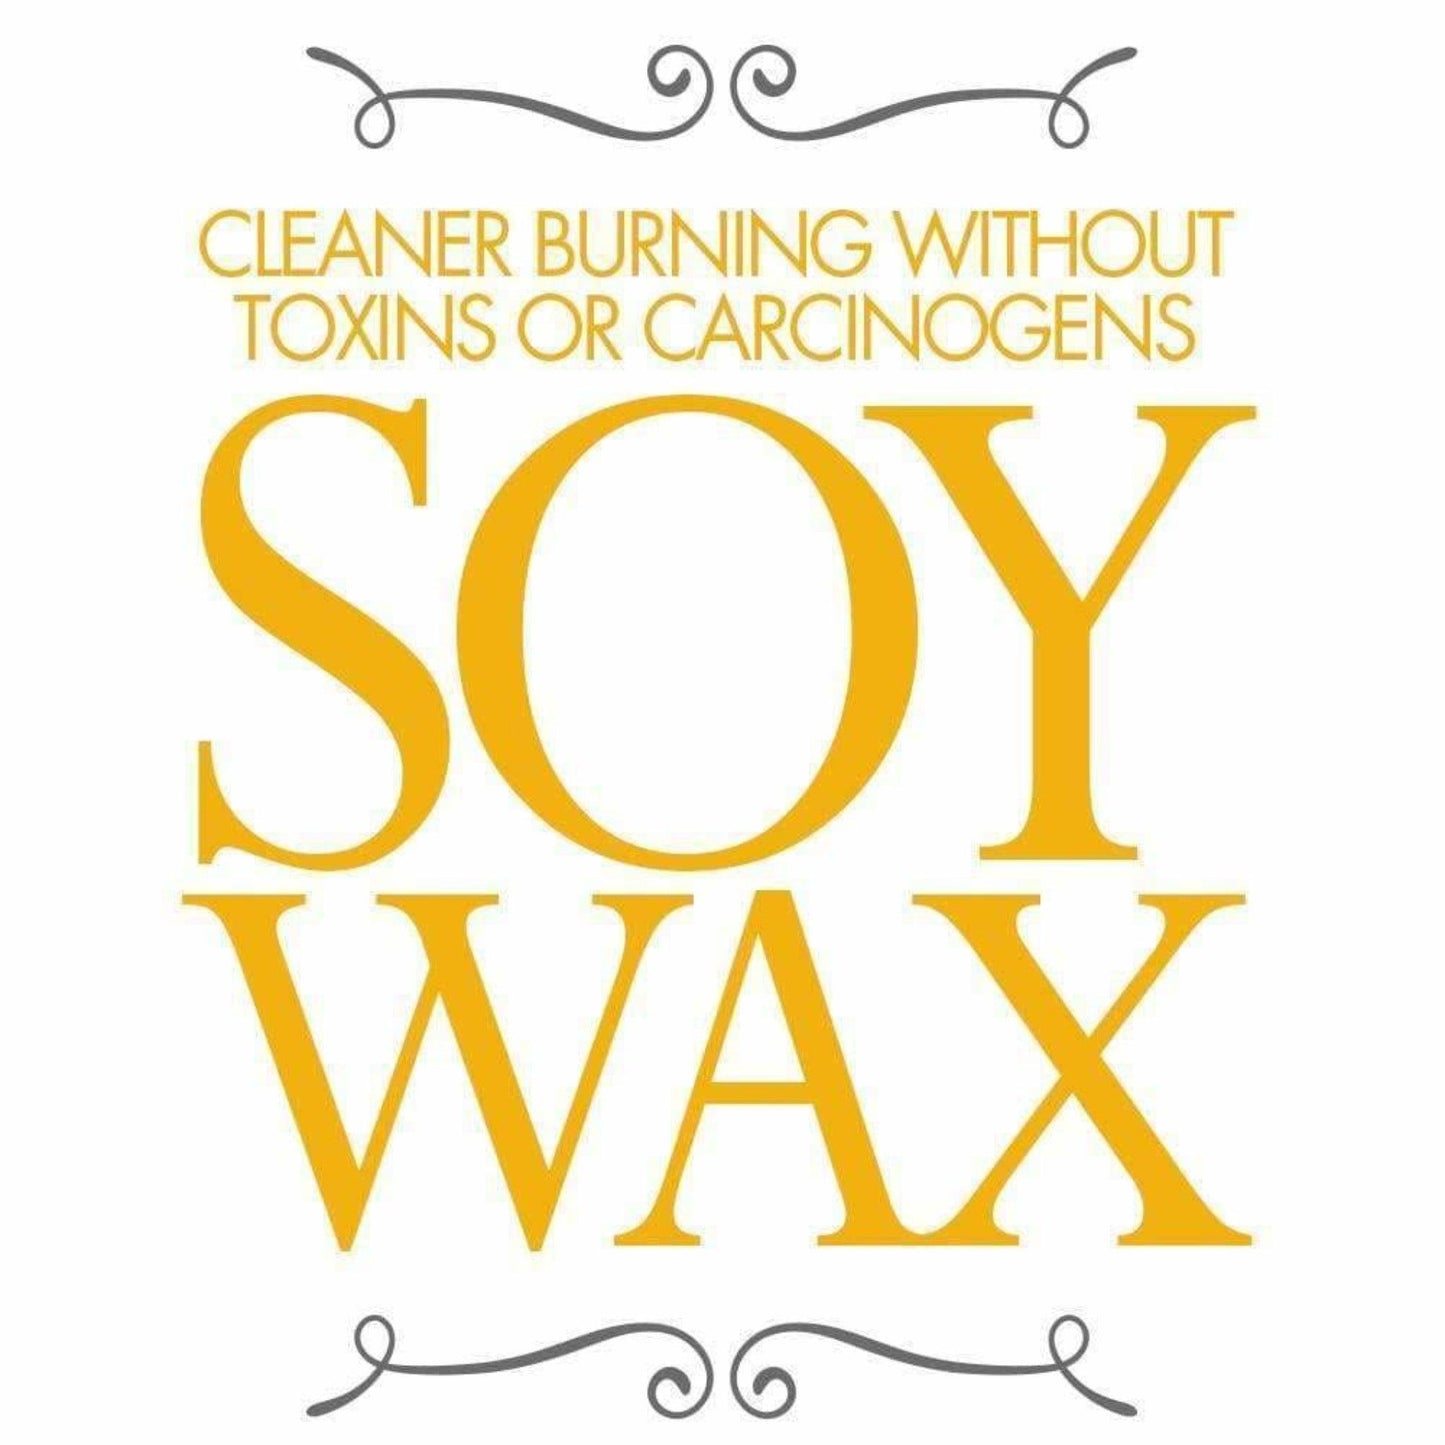 Lily & Loaf Cinnamon and Orange Soy Wax Candle provides a cleaner burn without toxins or carcinogens